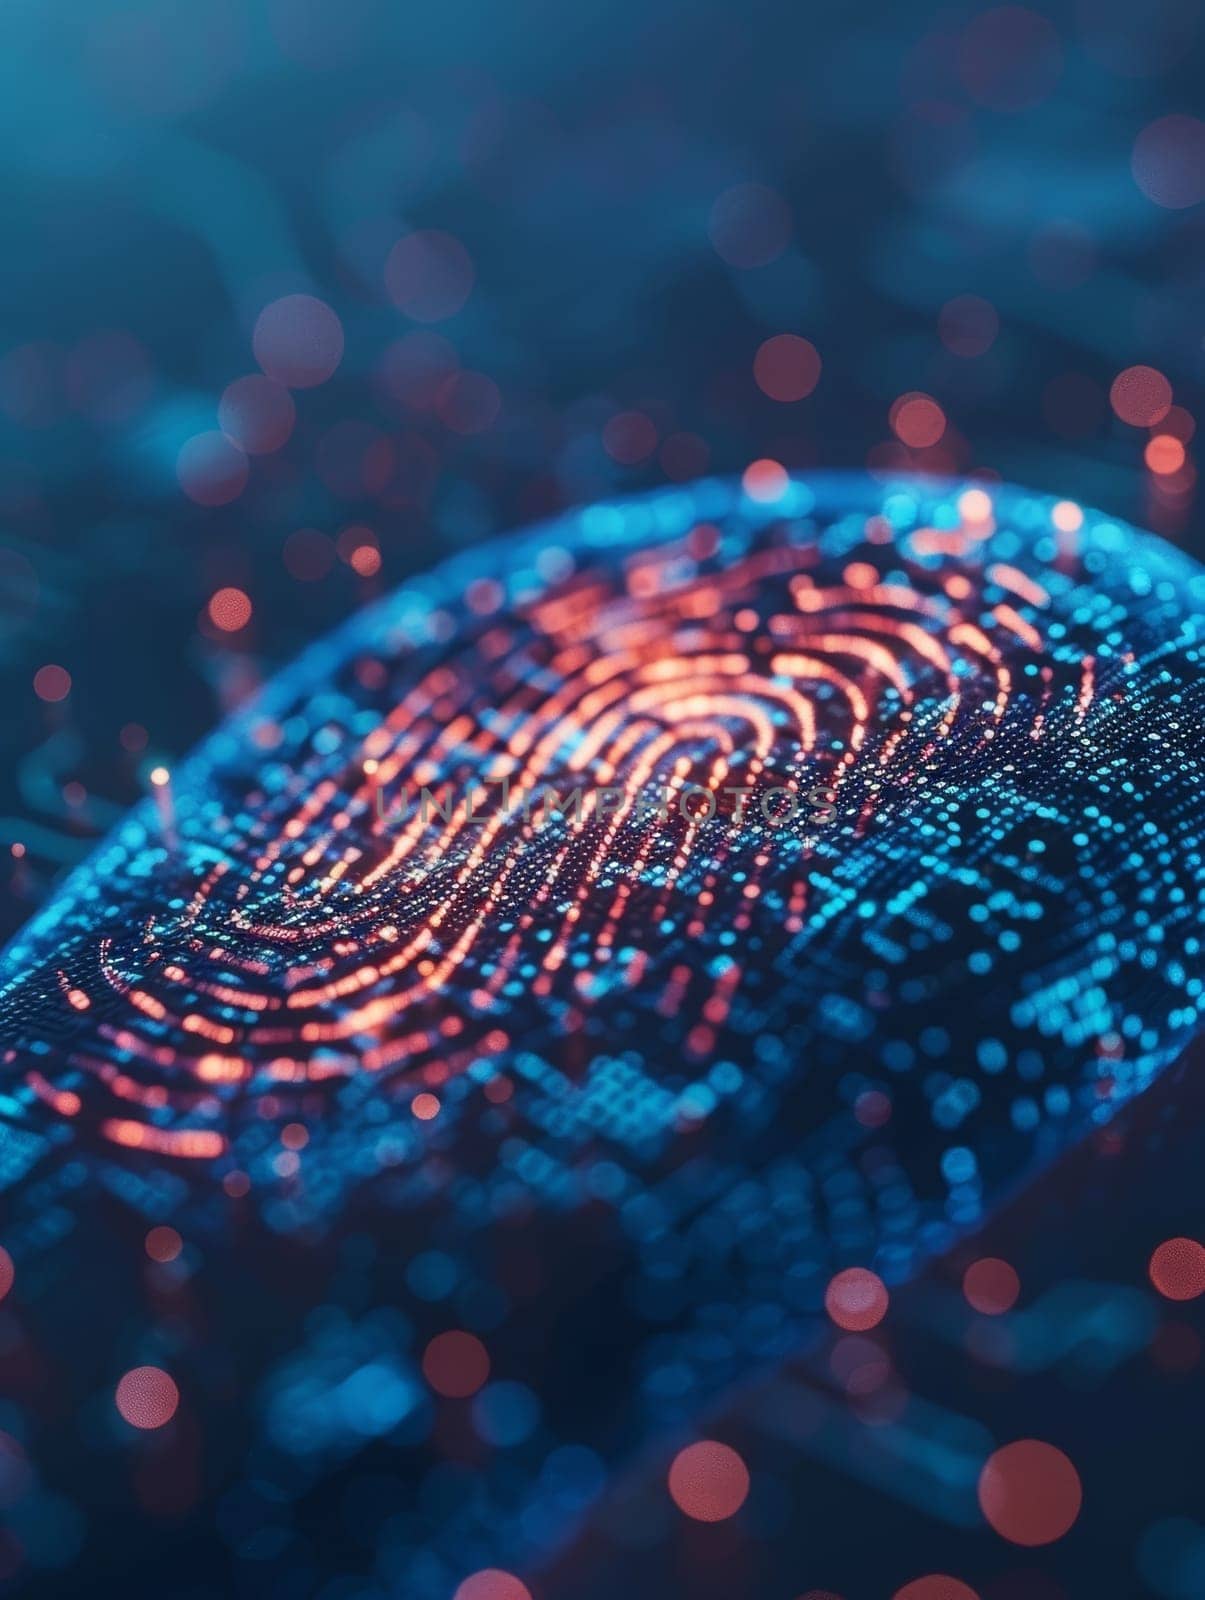 An abstract image of a fingerprint integrated with a digital network interface, highlighted in blue and red tones for a tech theme